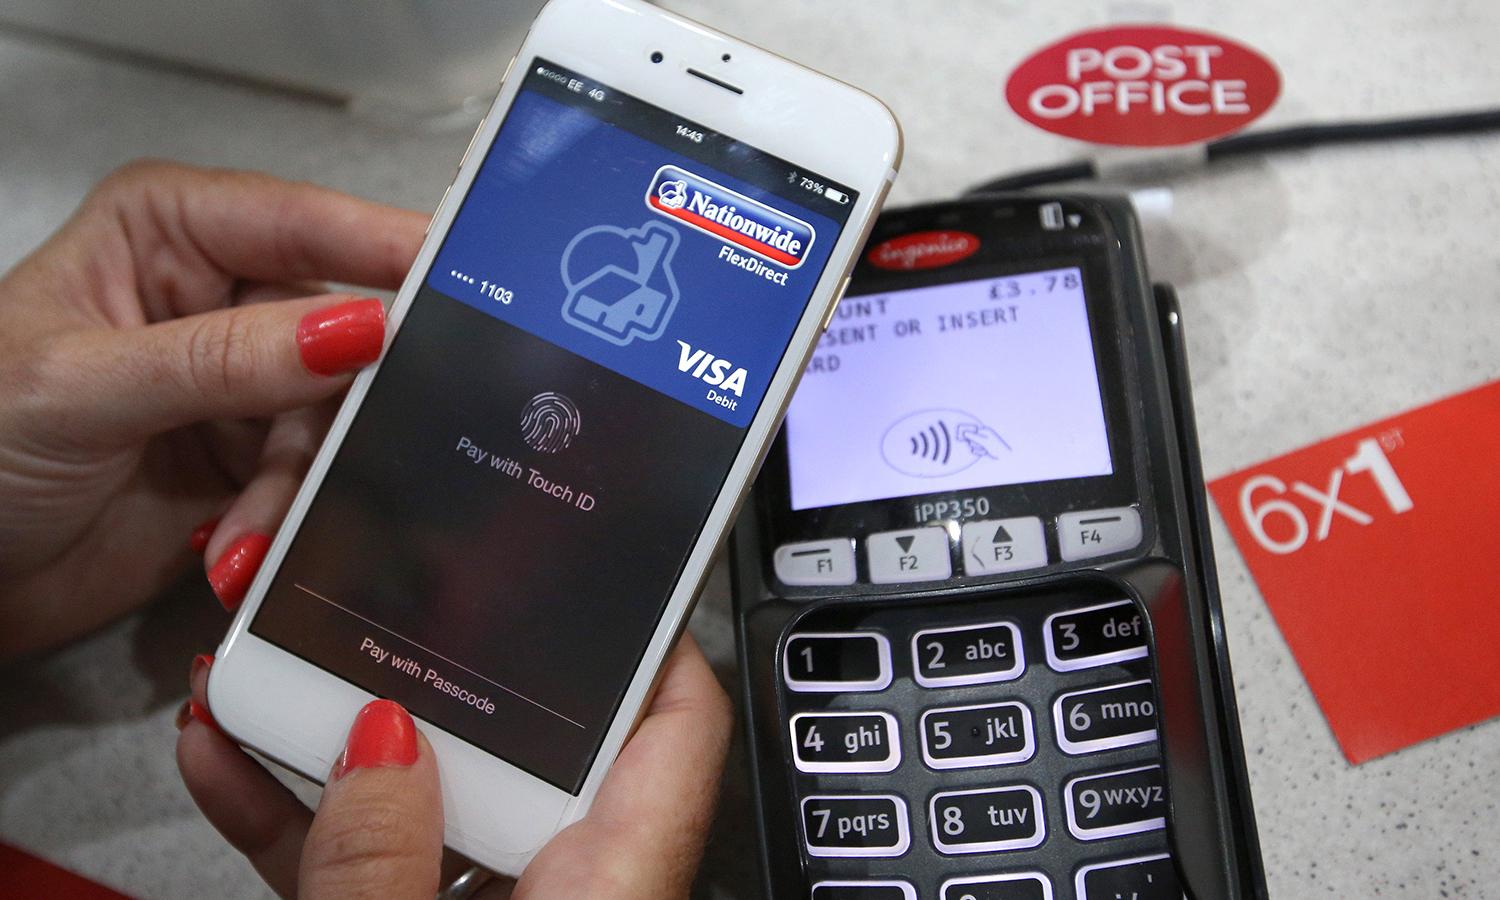 The growth of digital transactions provide fraudsters another avenue to target, according to a LexisNexis report. Pictured: An iPhone is used to make an Apple Pay purchase at the Post Office on July 14, 2015, in London. (Photo by Peter Macdiarmid/Getty Images)